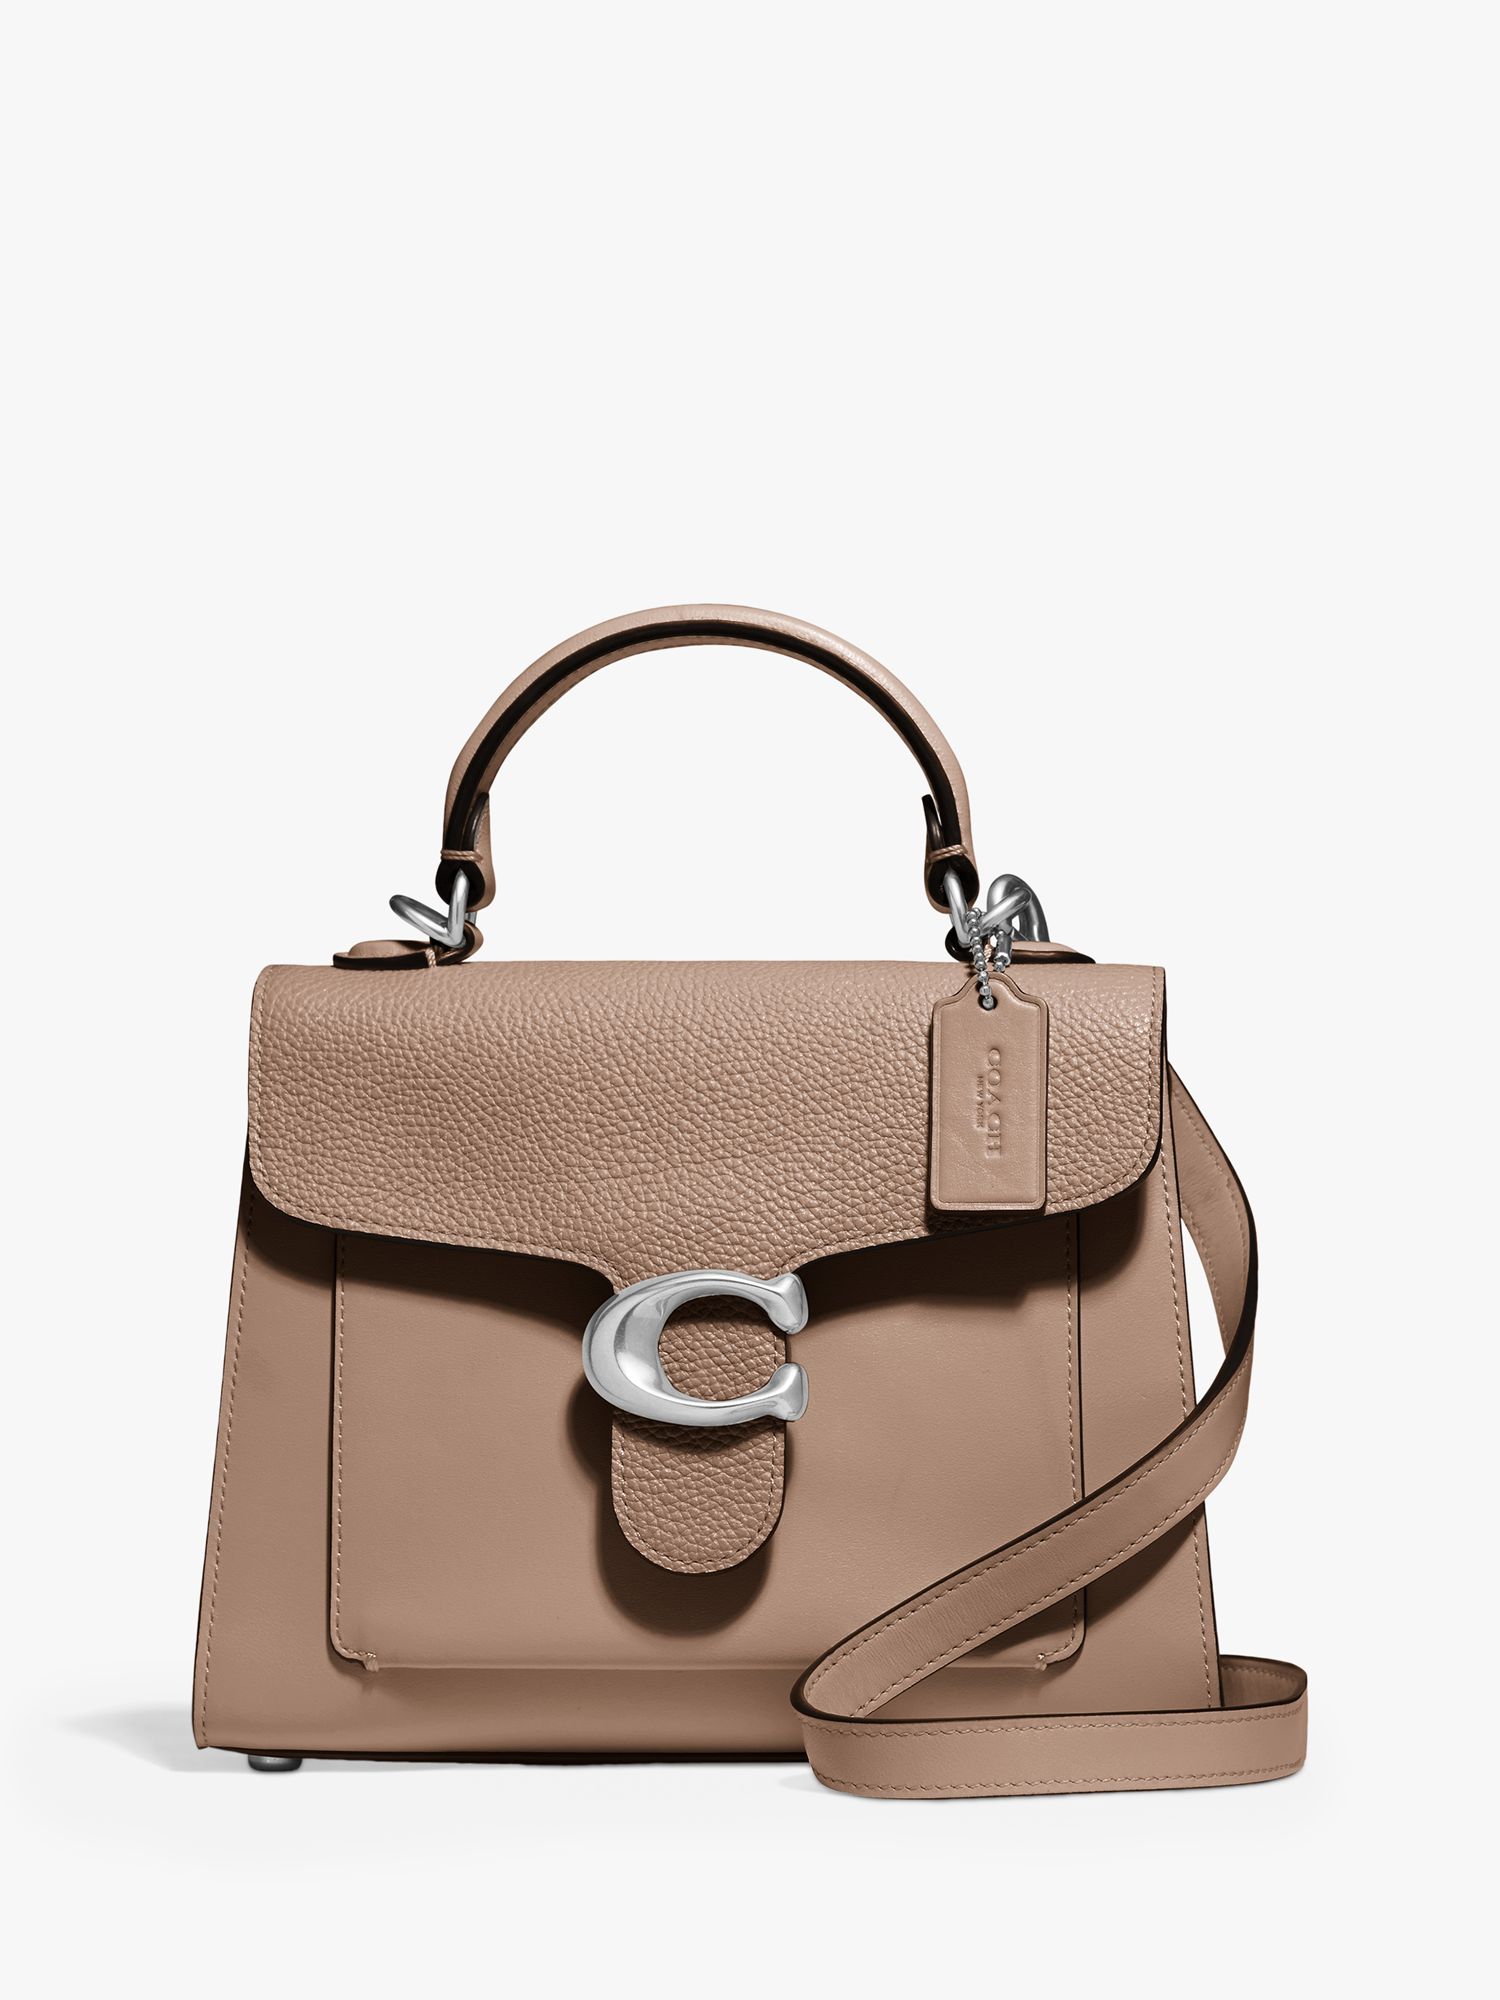 Coach Tabby 20 Leather Cross Body Bag, Taupe at John Lewis & Partners